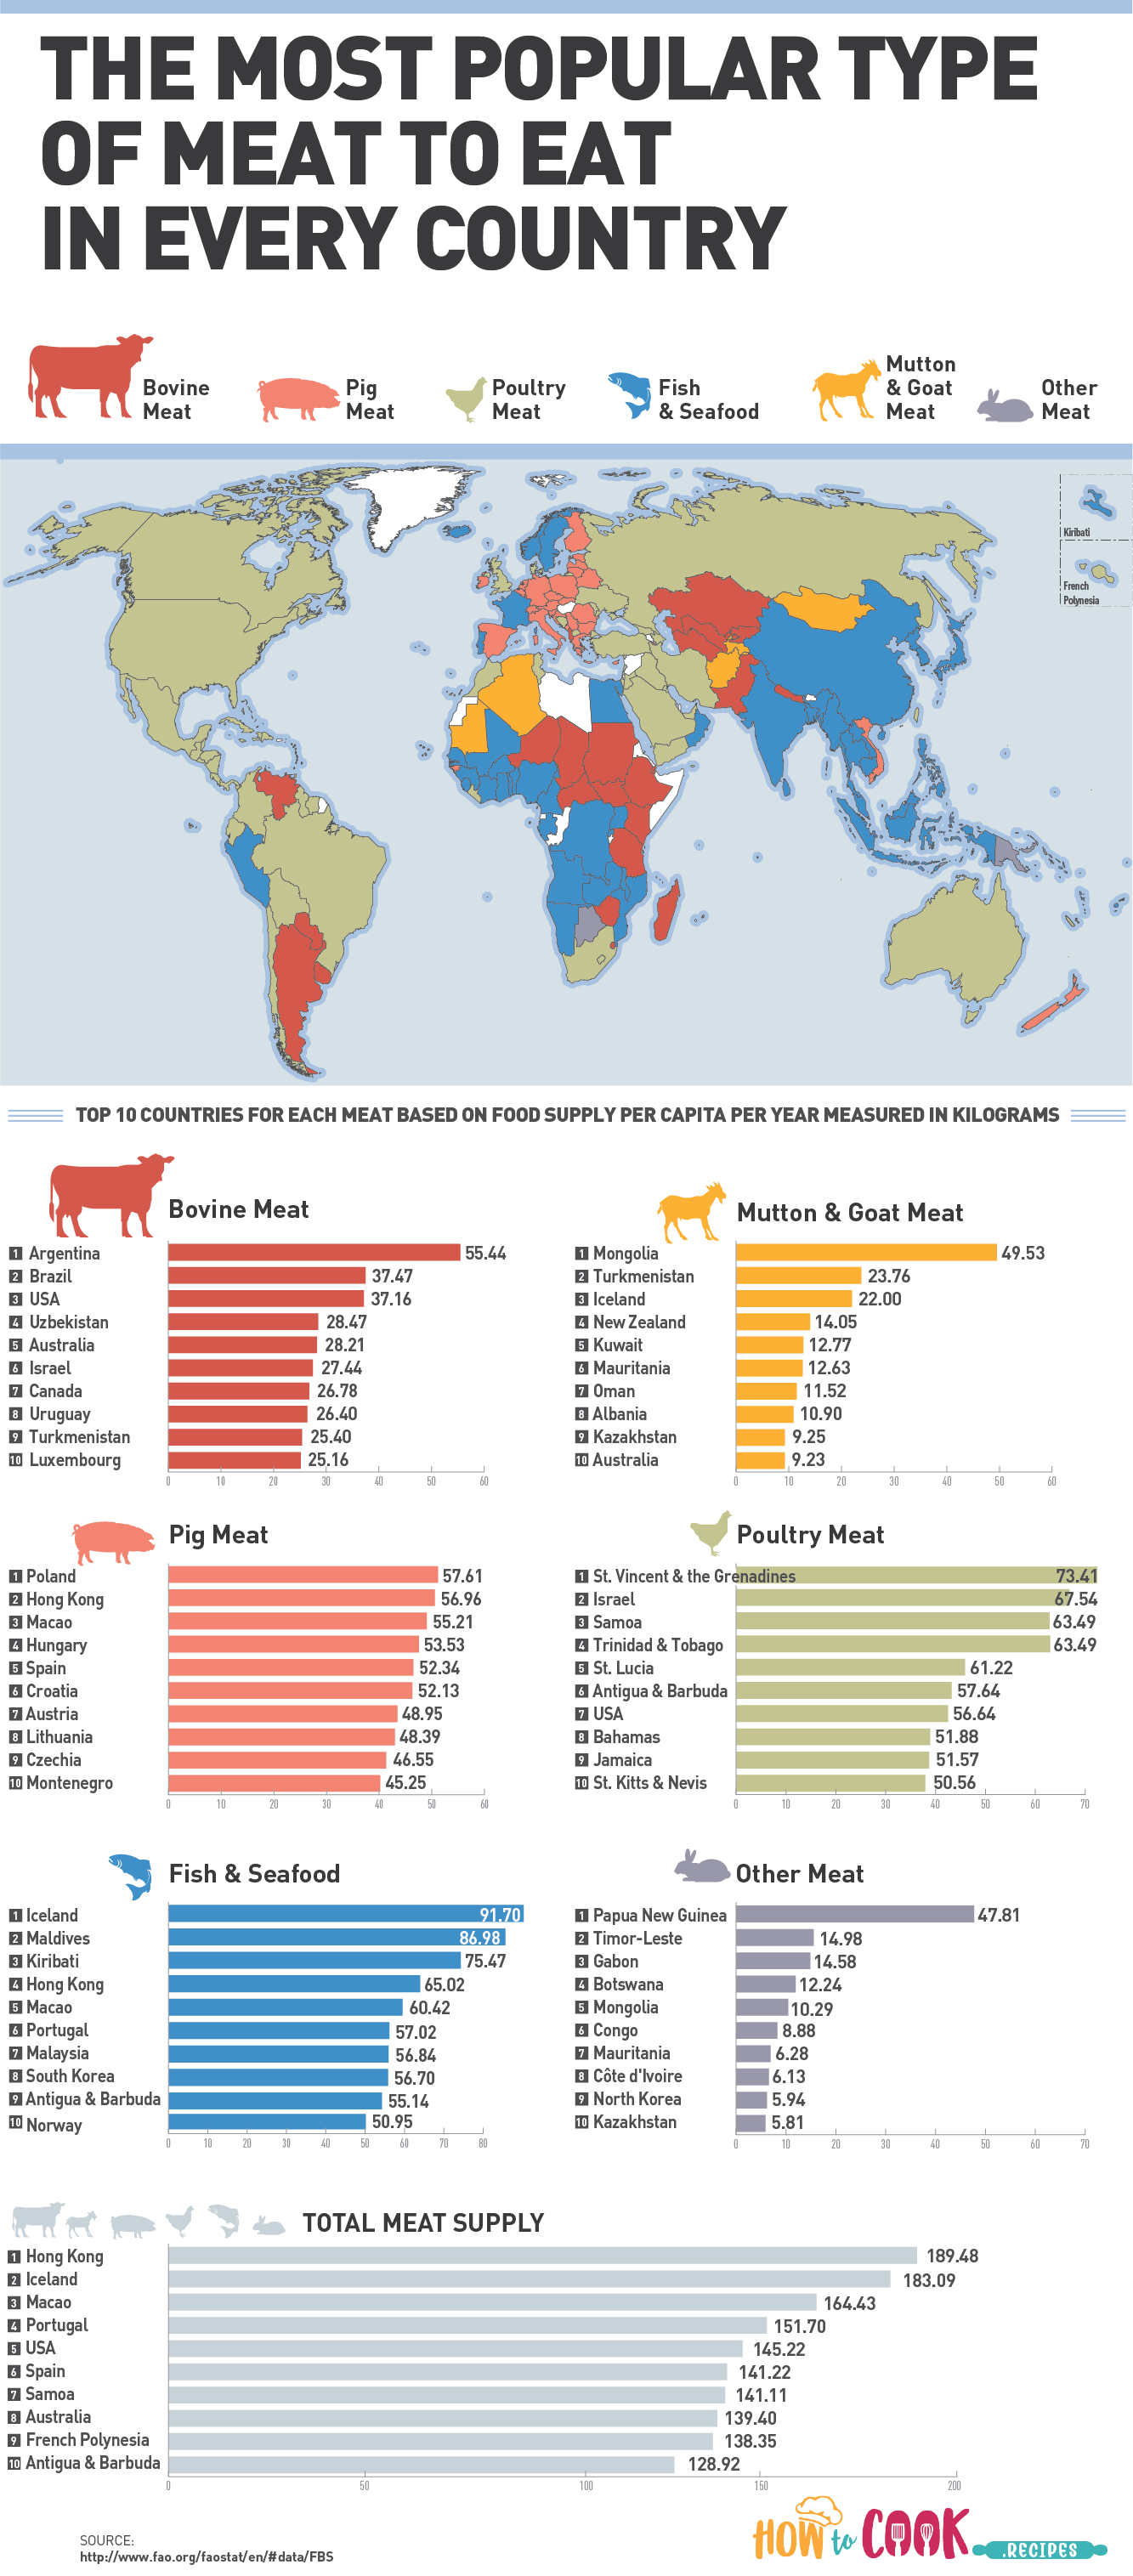 The Most Popular Type of Meat to Eat in Every Country